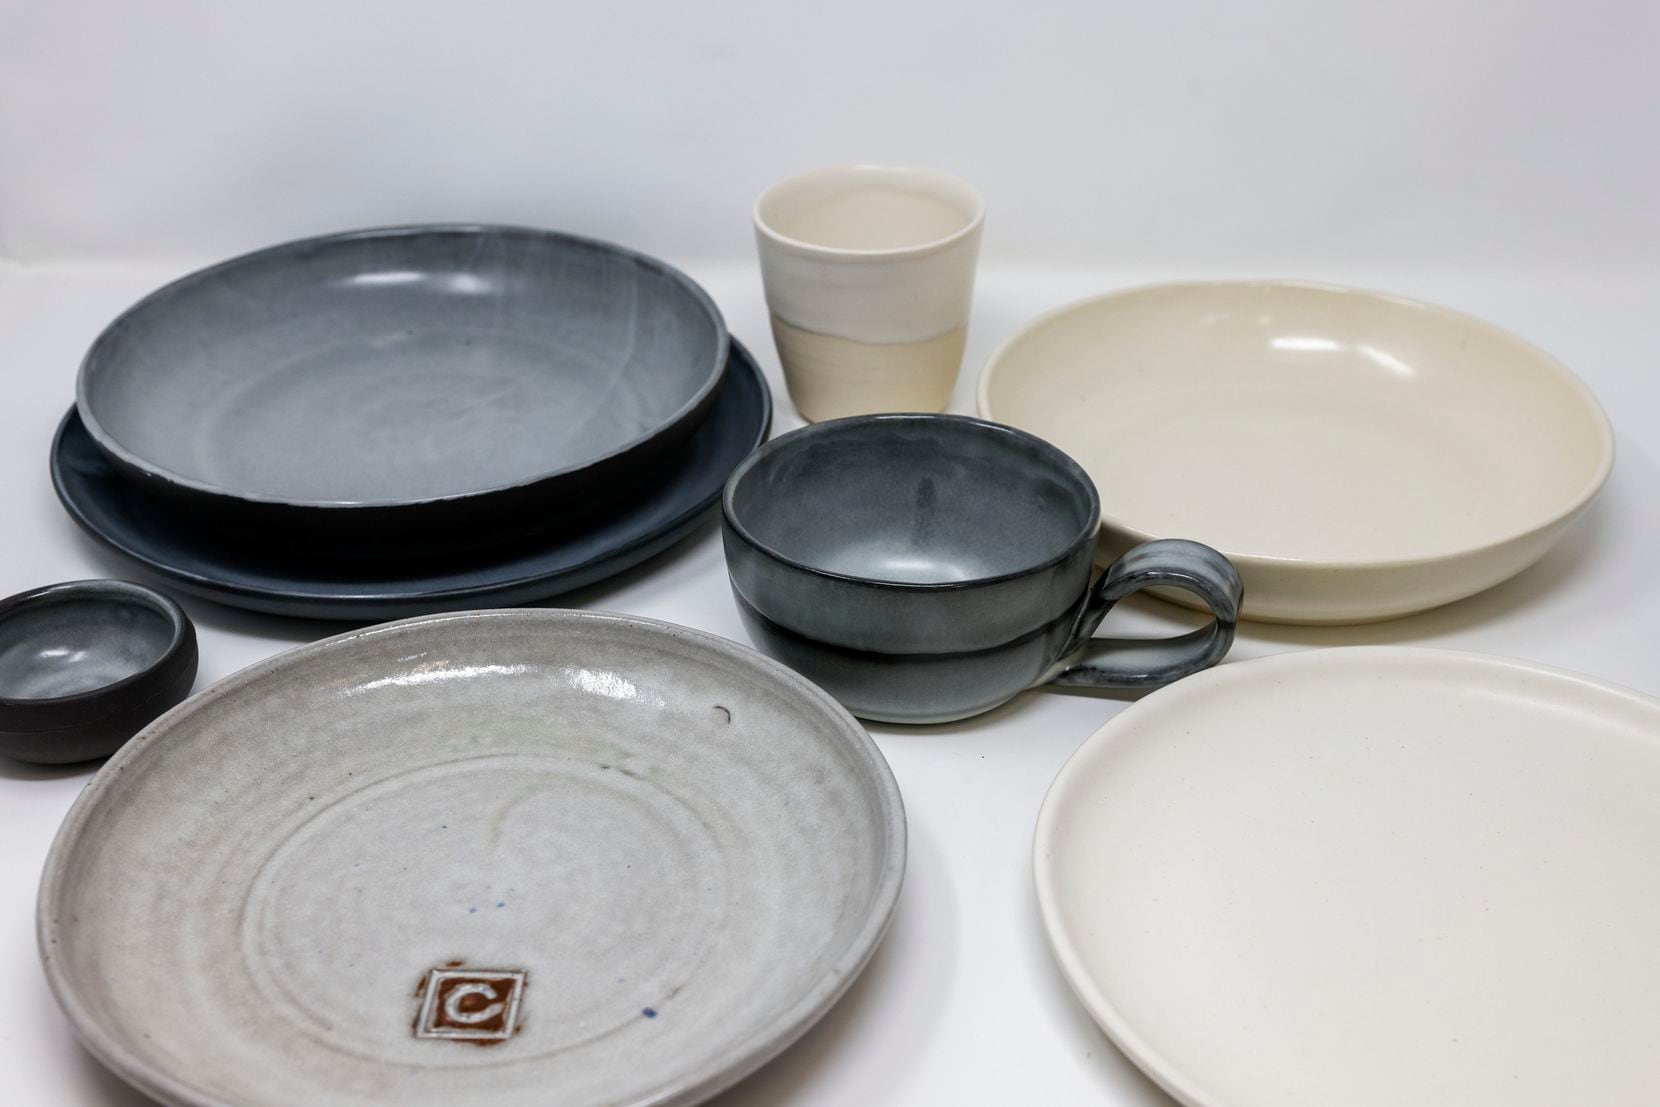 For many restaurants, Marcello Andres is a go-to source for ceramic plates, glasses and mugs.